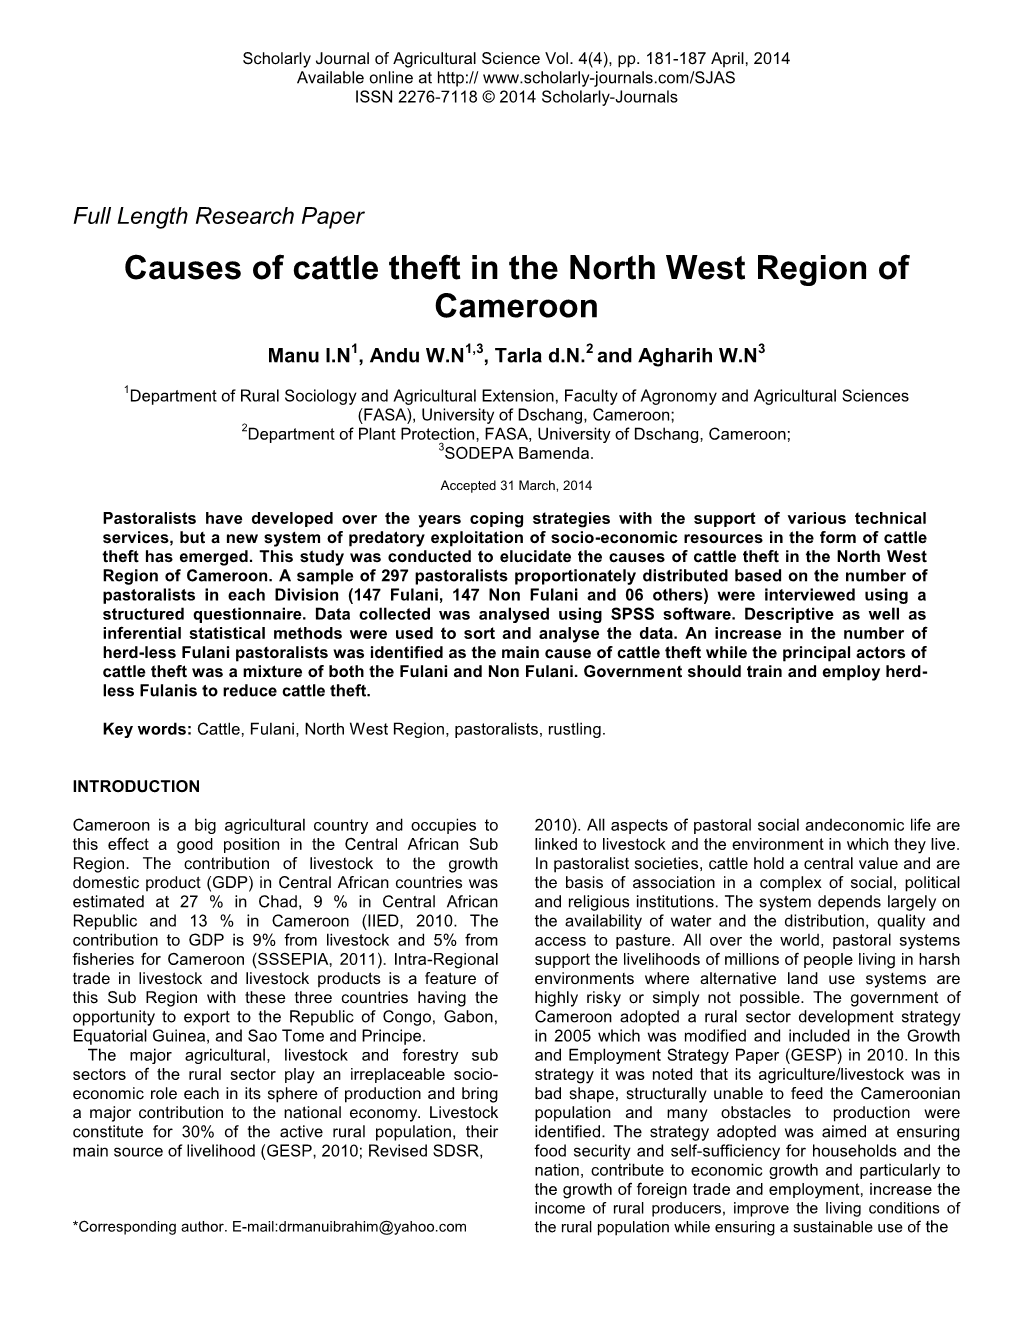 Causes of Cattle Theft in the North West Region of Cameroon Manu I.N1, Andu W.N1,3, Tarla D.N.2 and Agharih W.N3